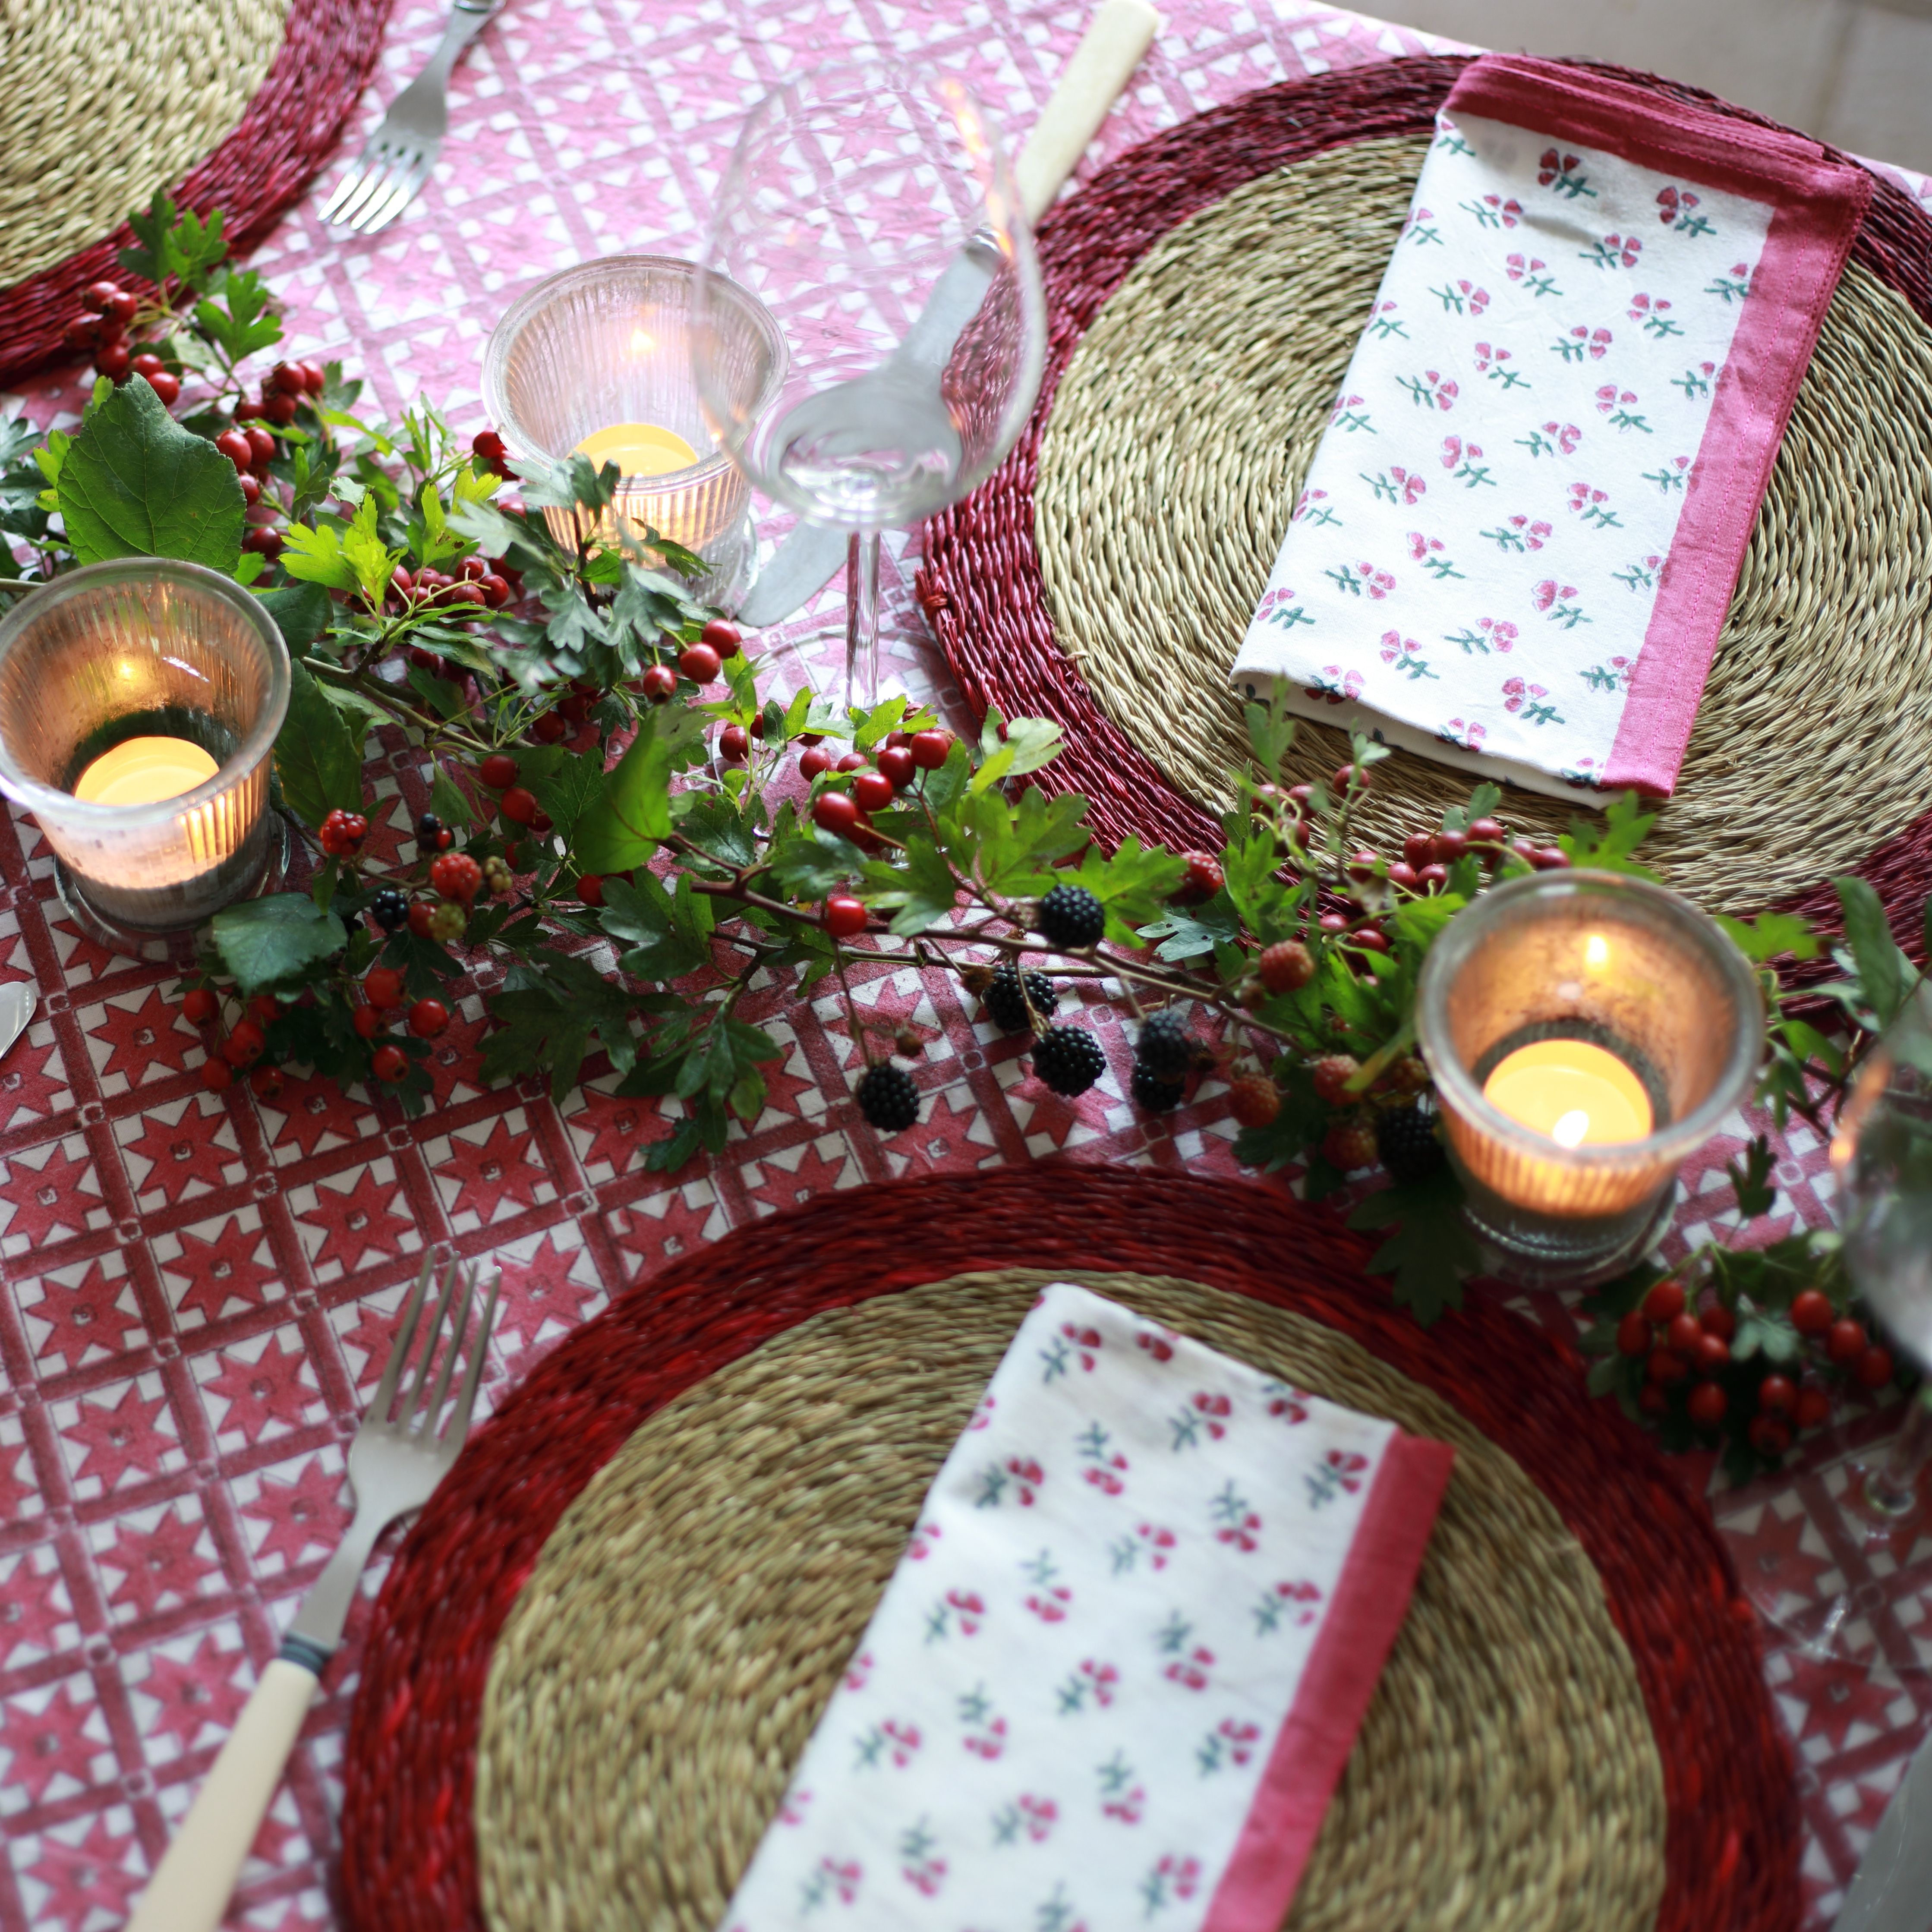 NEW WOVEN PLACEMATS